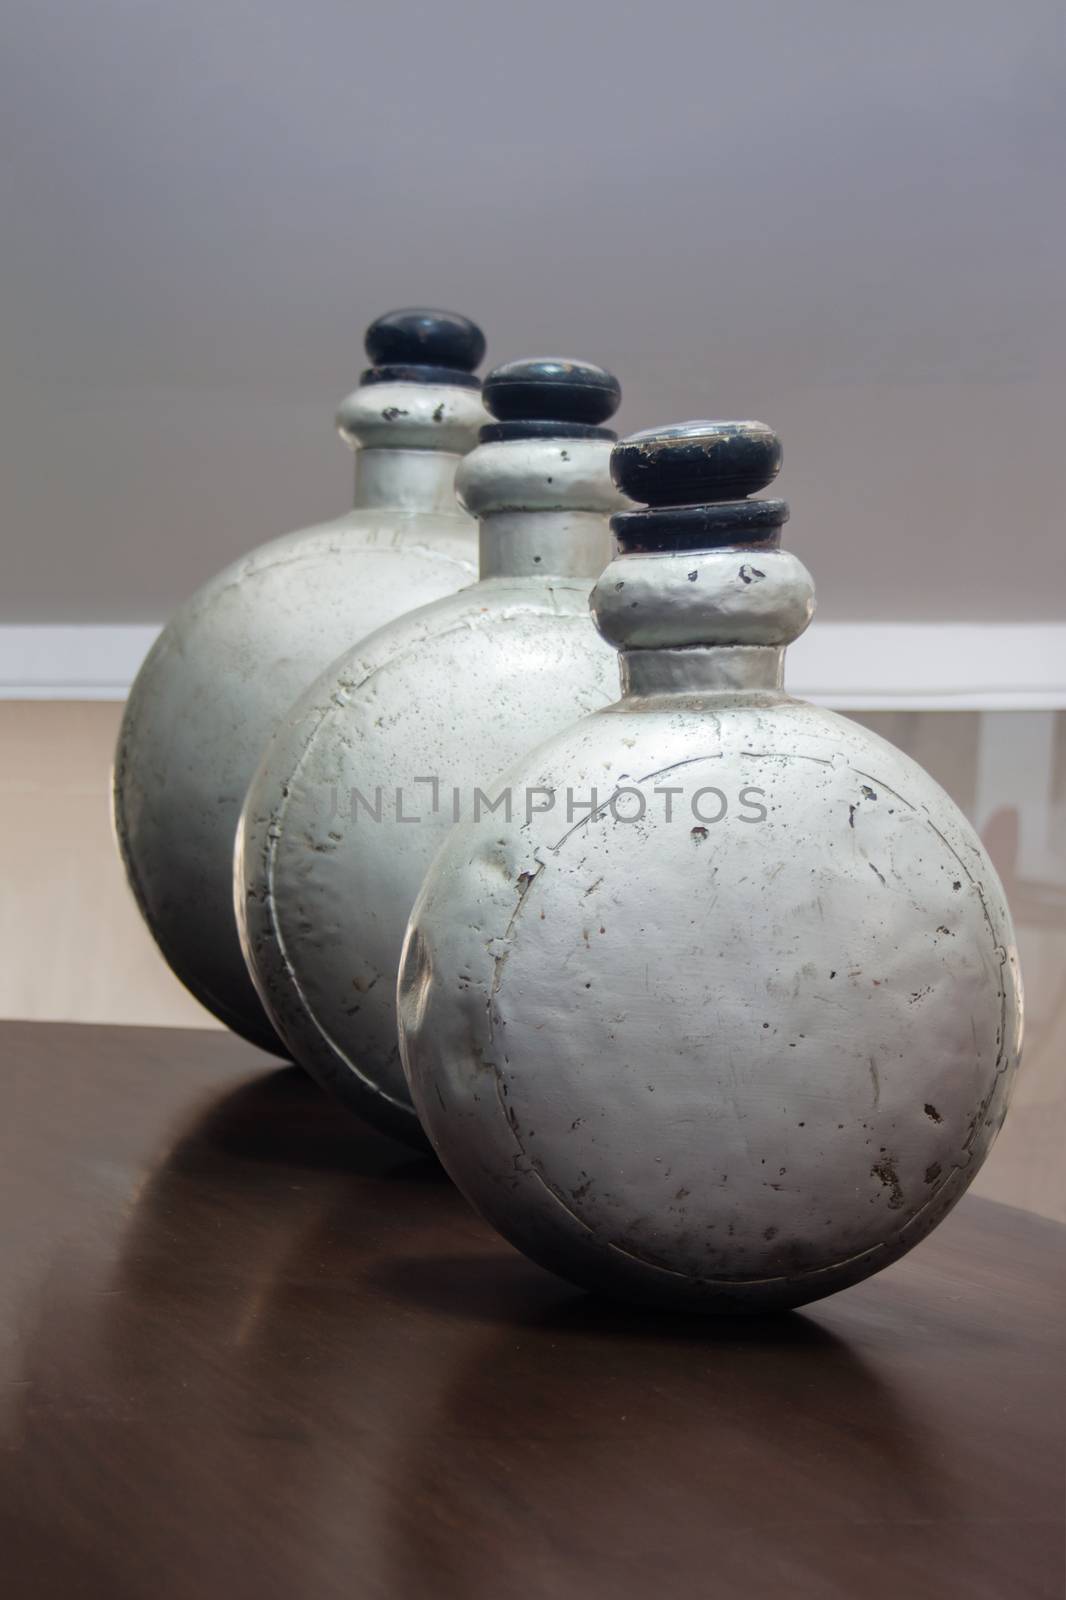 Vertical color portrait in a studio showroom interior displaying old industrial aluminum chemical bottles standing on a laminated dark wood table. Location for this  generic shot was Bombay India, available with property release.